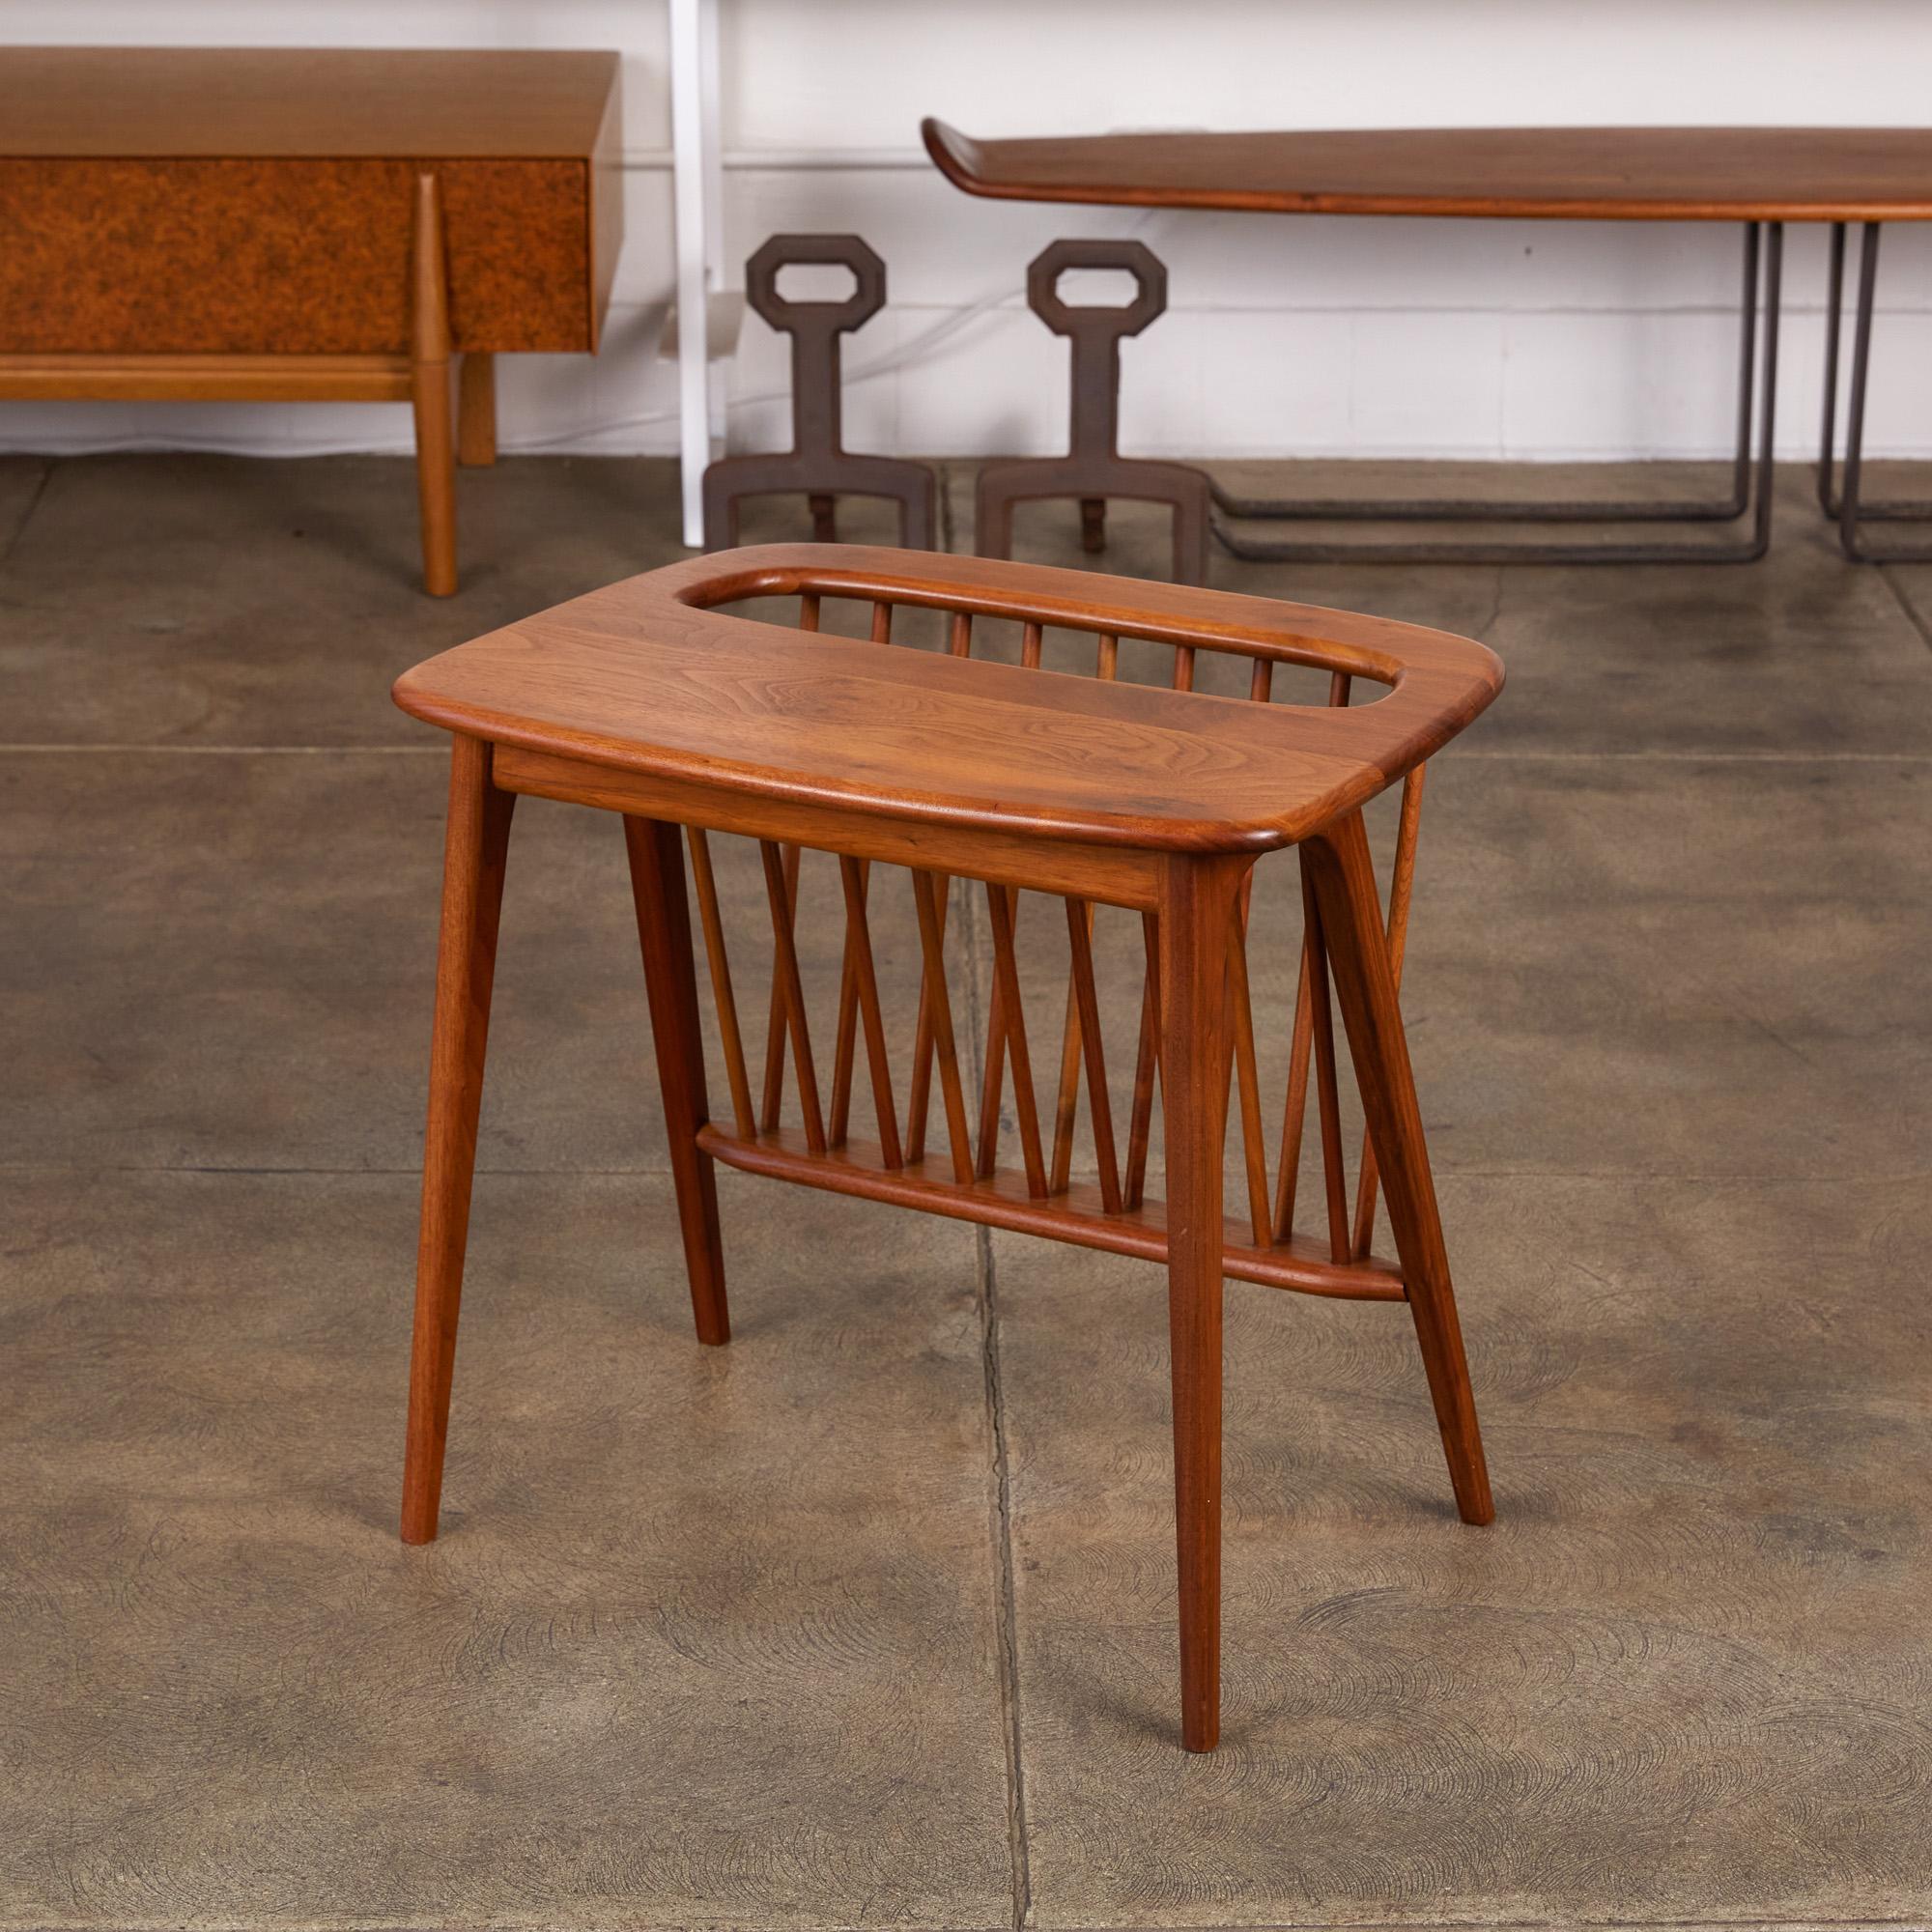 Walnut side table with magazine rack by Arthur Umanoff for Washington Woodcraft, USA, circa 1950s. The table features a sculpted solid walnut top and body with tapered legs and dowel joinery. The storage area is composed of two opposing rows of